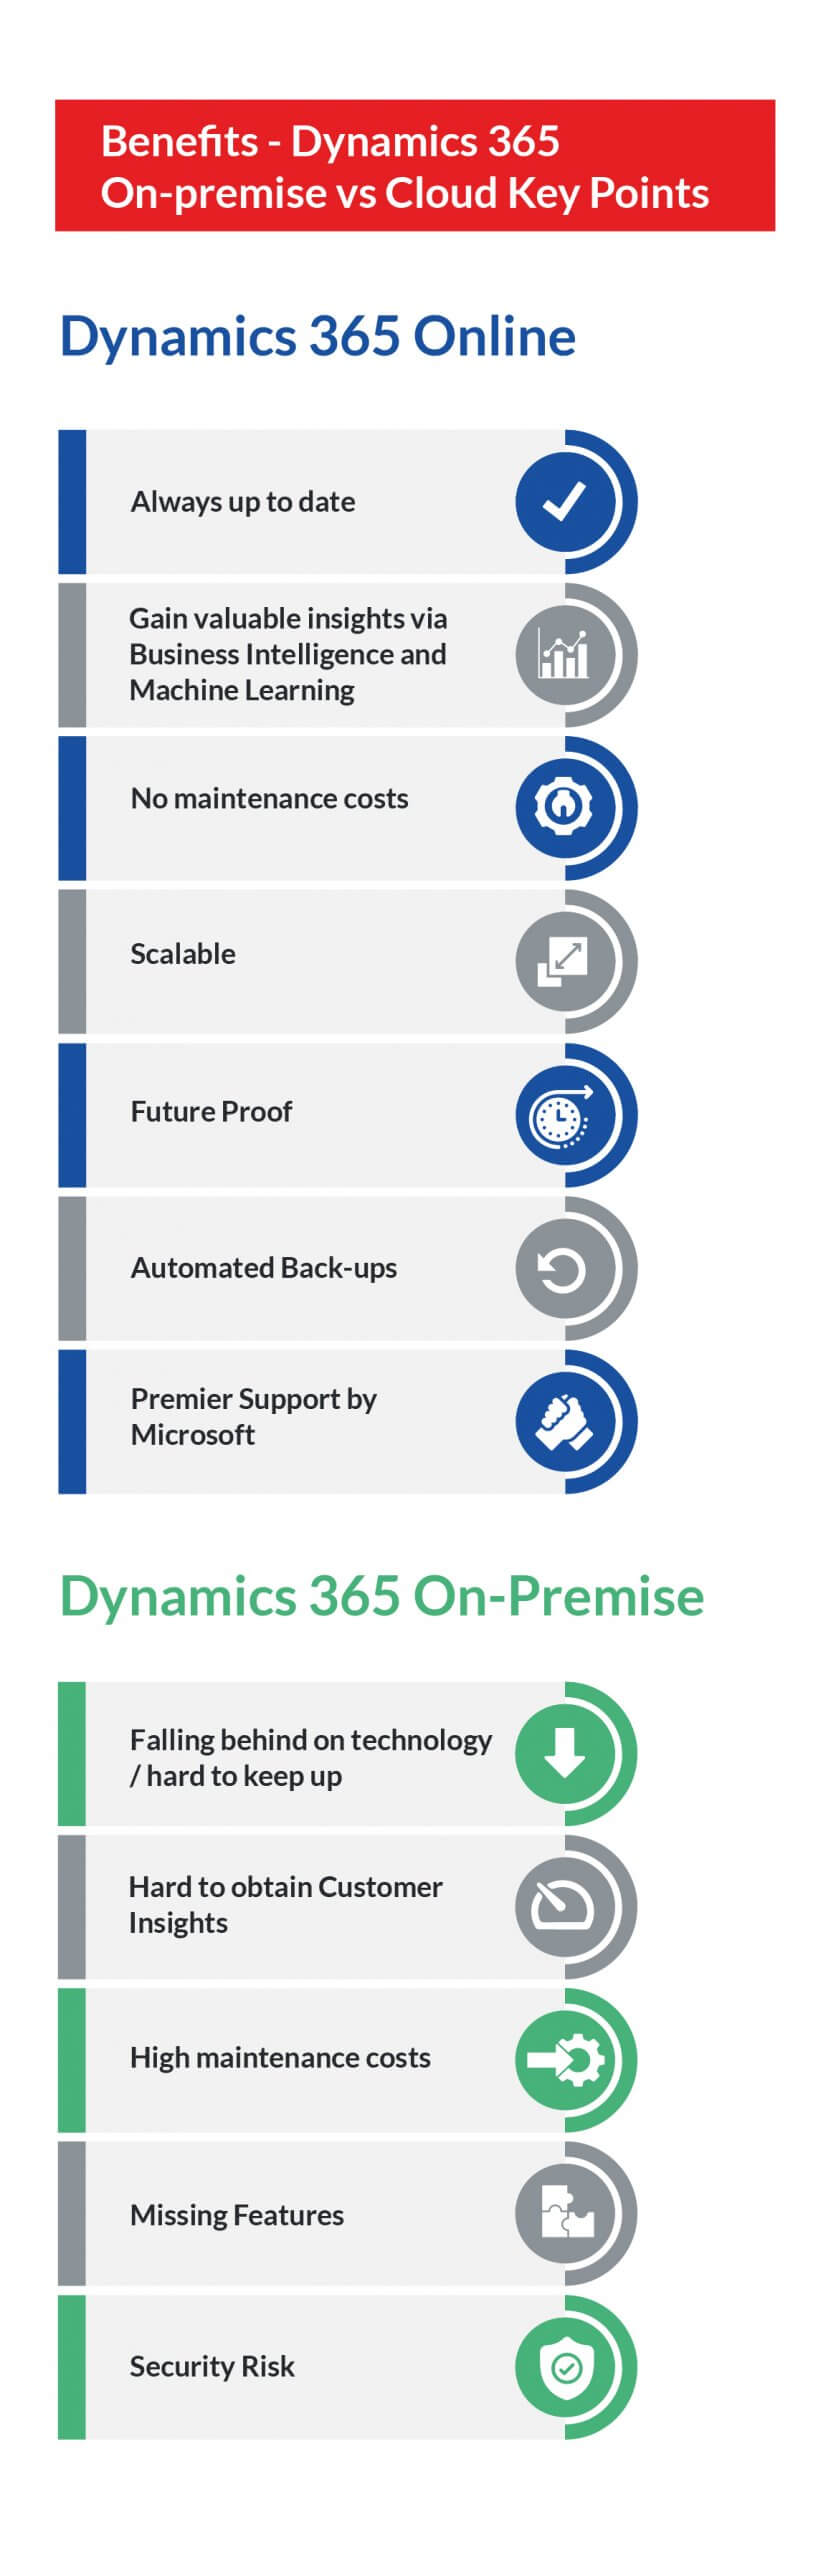 Use custom controls to visualize data in Dynamics 365 Customer Engagement  (on-premises)